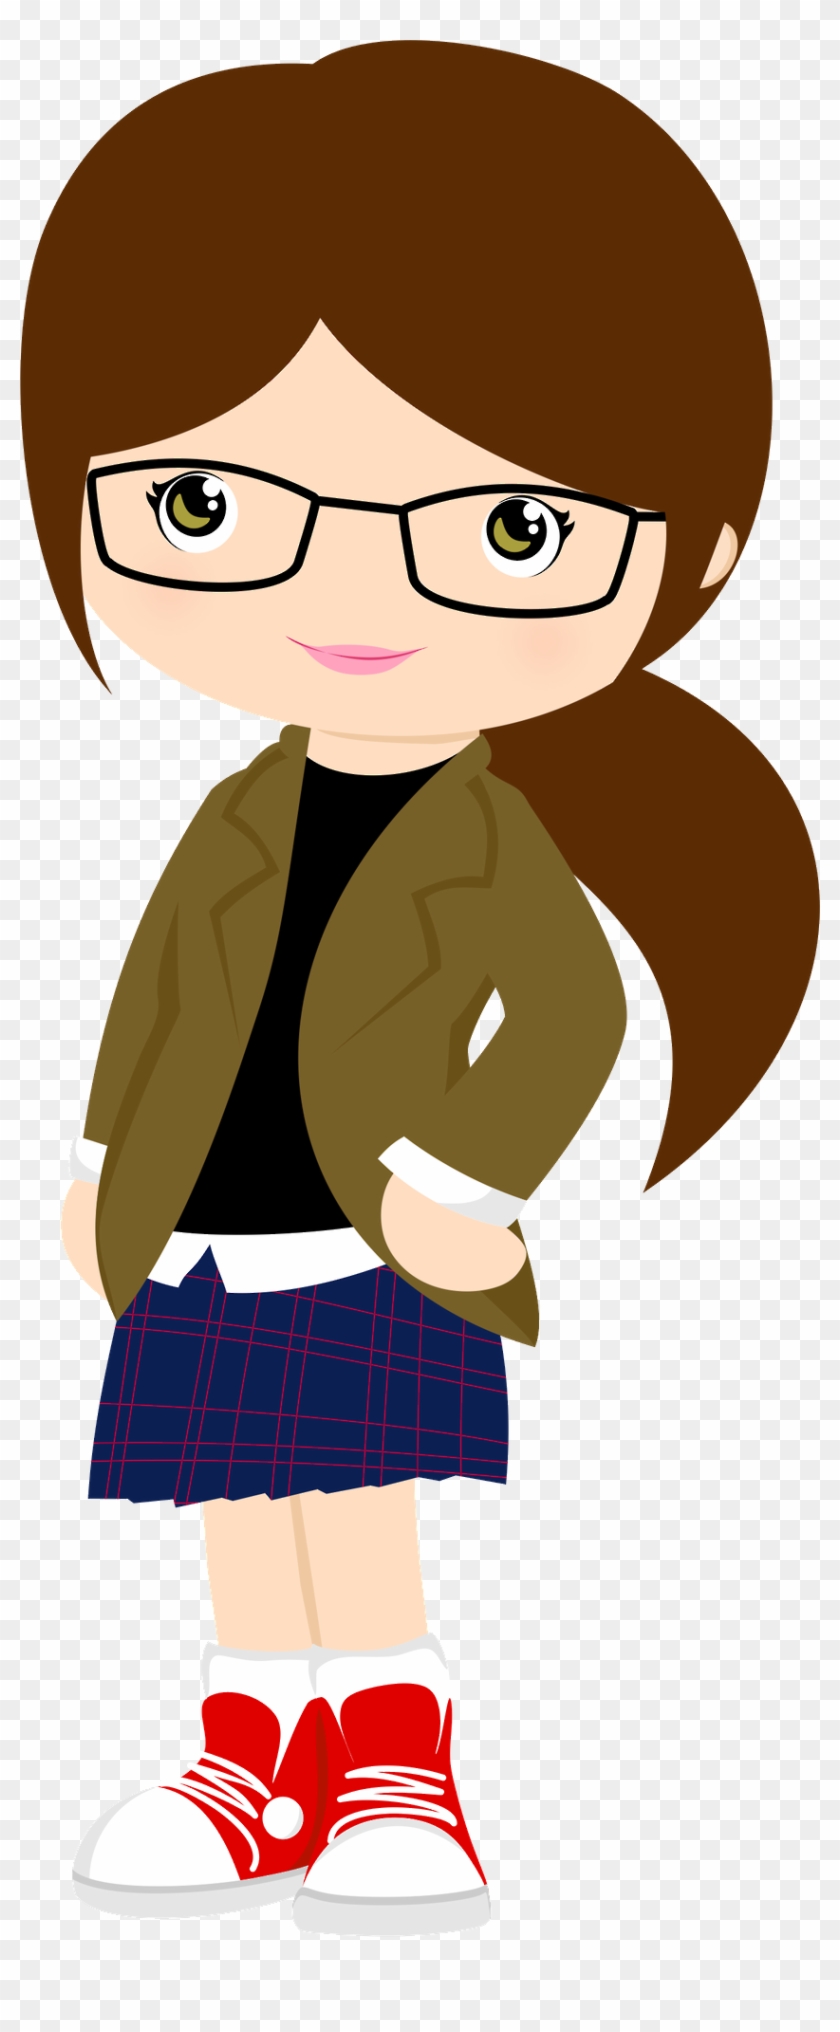 Girl Clipart Glass - Clipart Girl With Glasses - Png Download #2776548